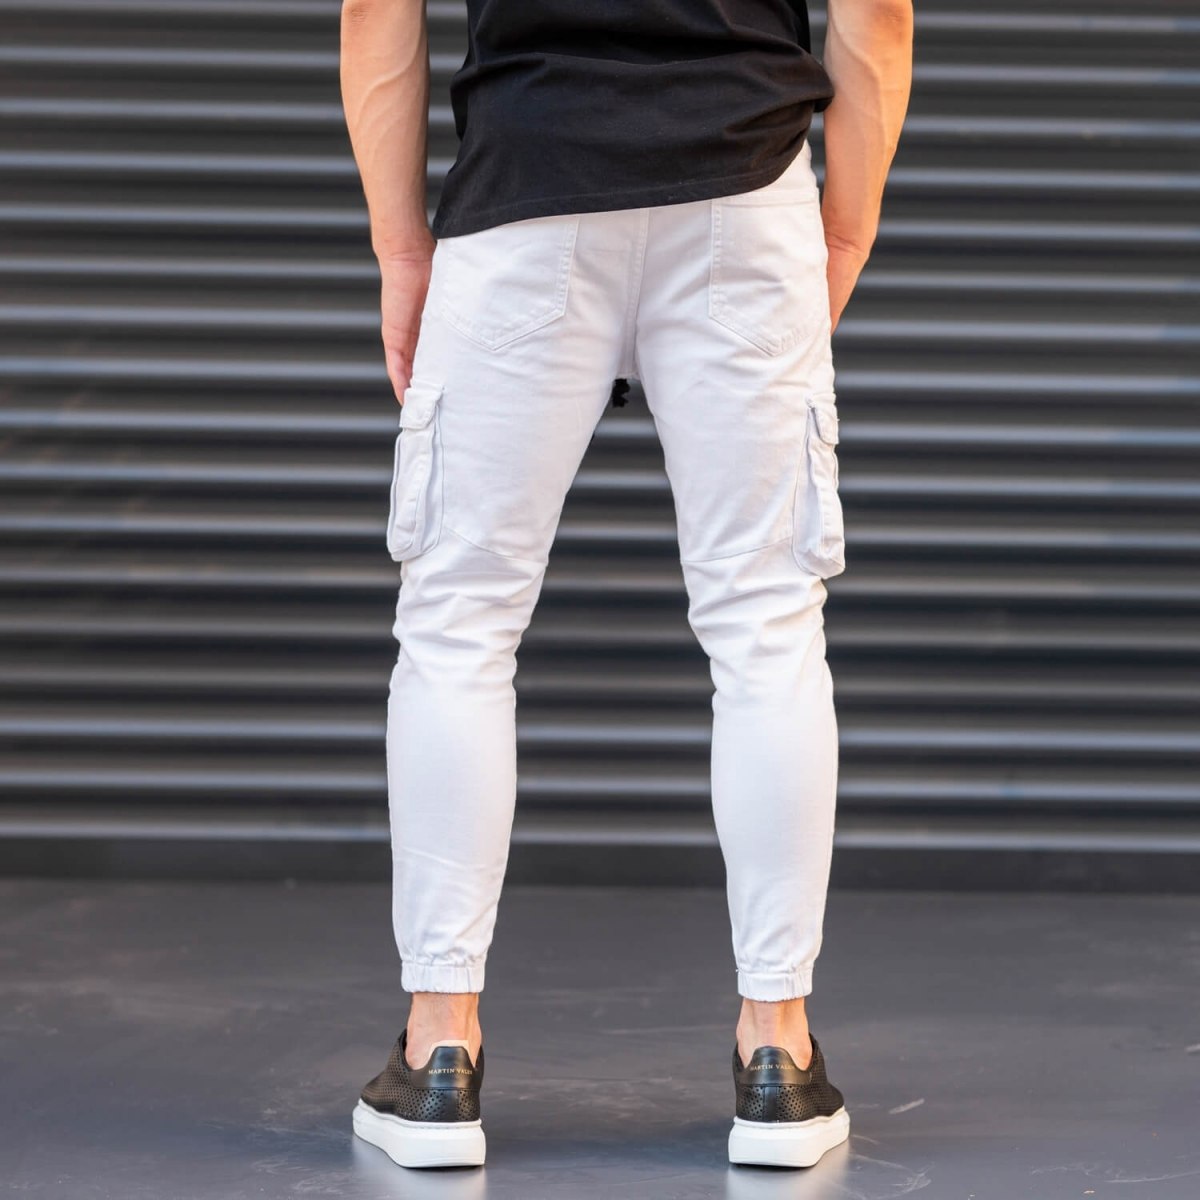 Men's Jeans with Pockets Style in White | Martin Valen